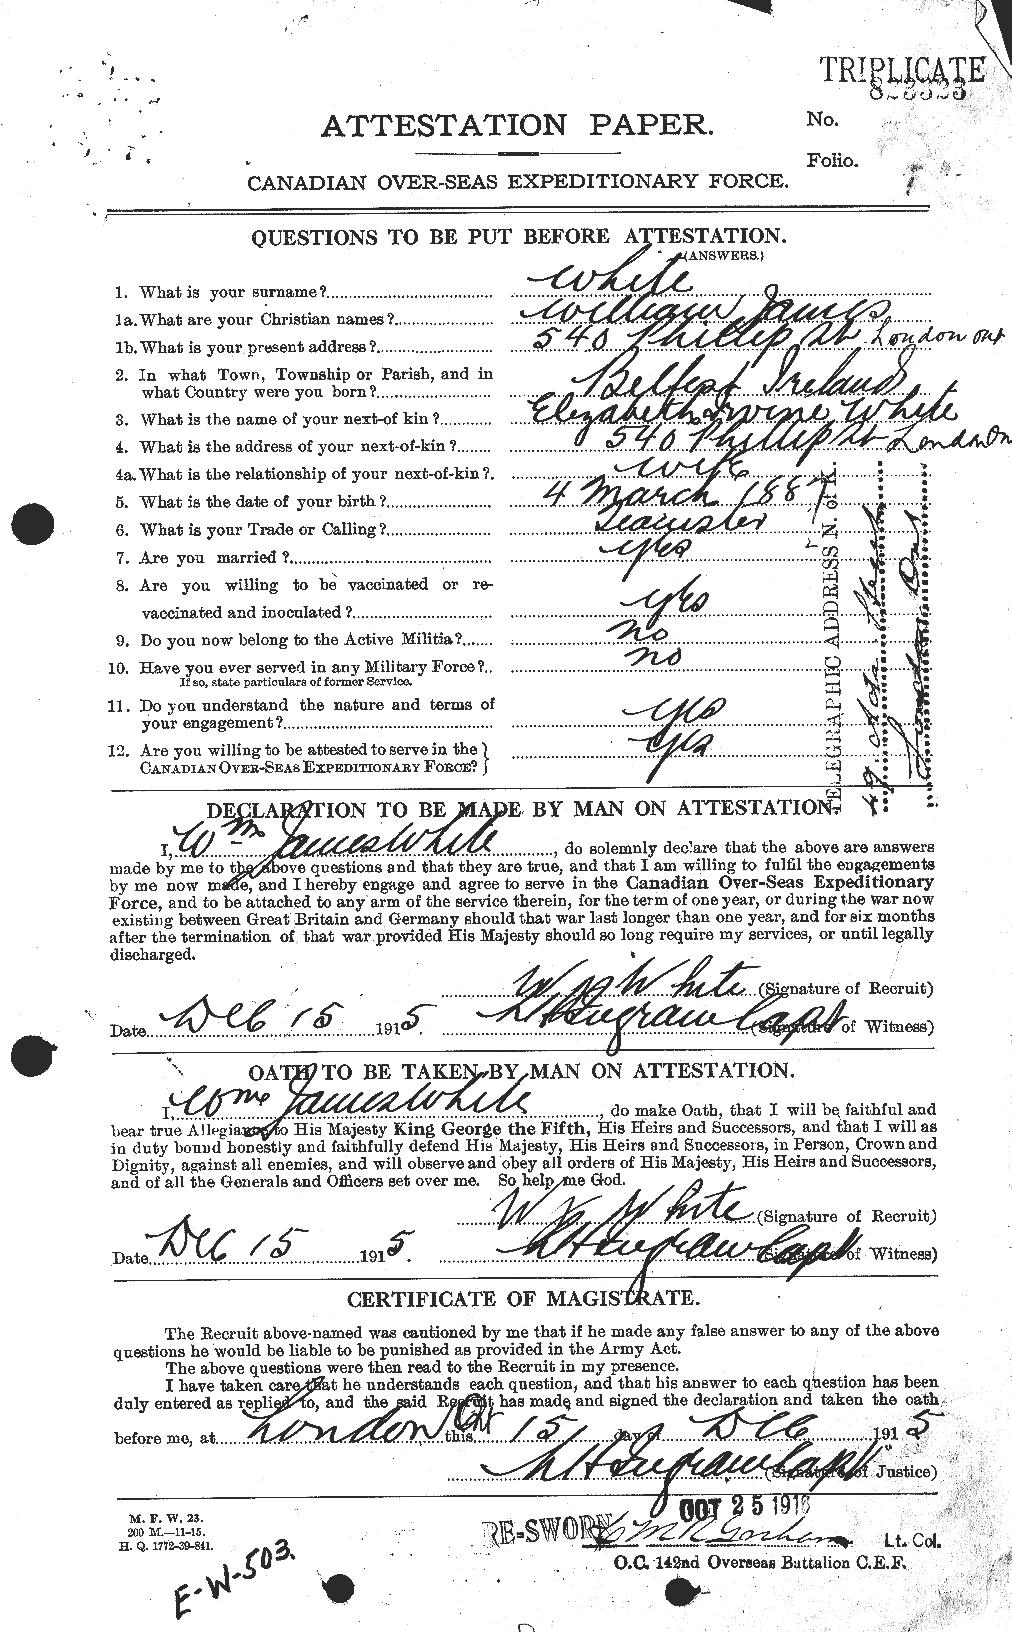 Personnel Records of the First World War - CEF 669040a